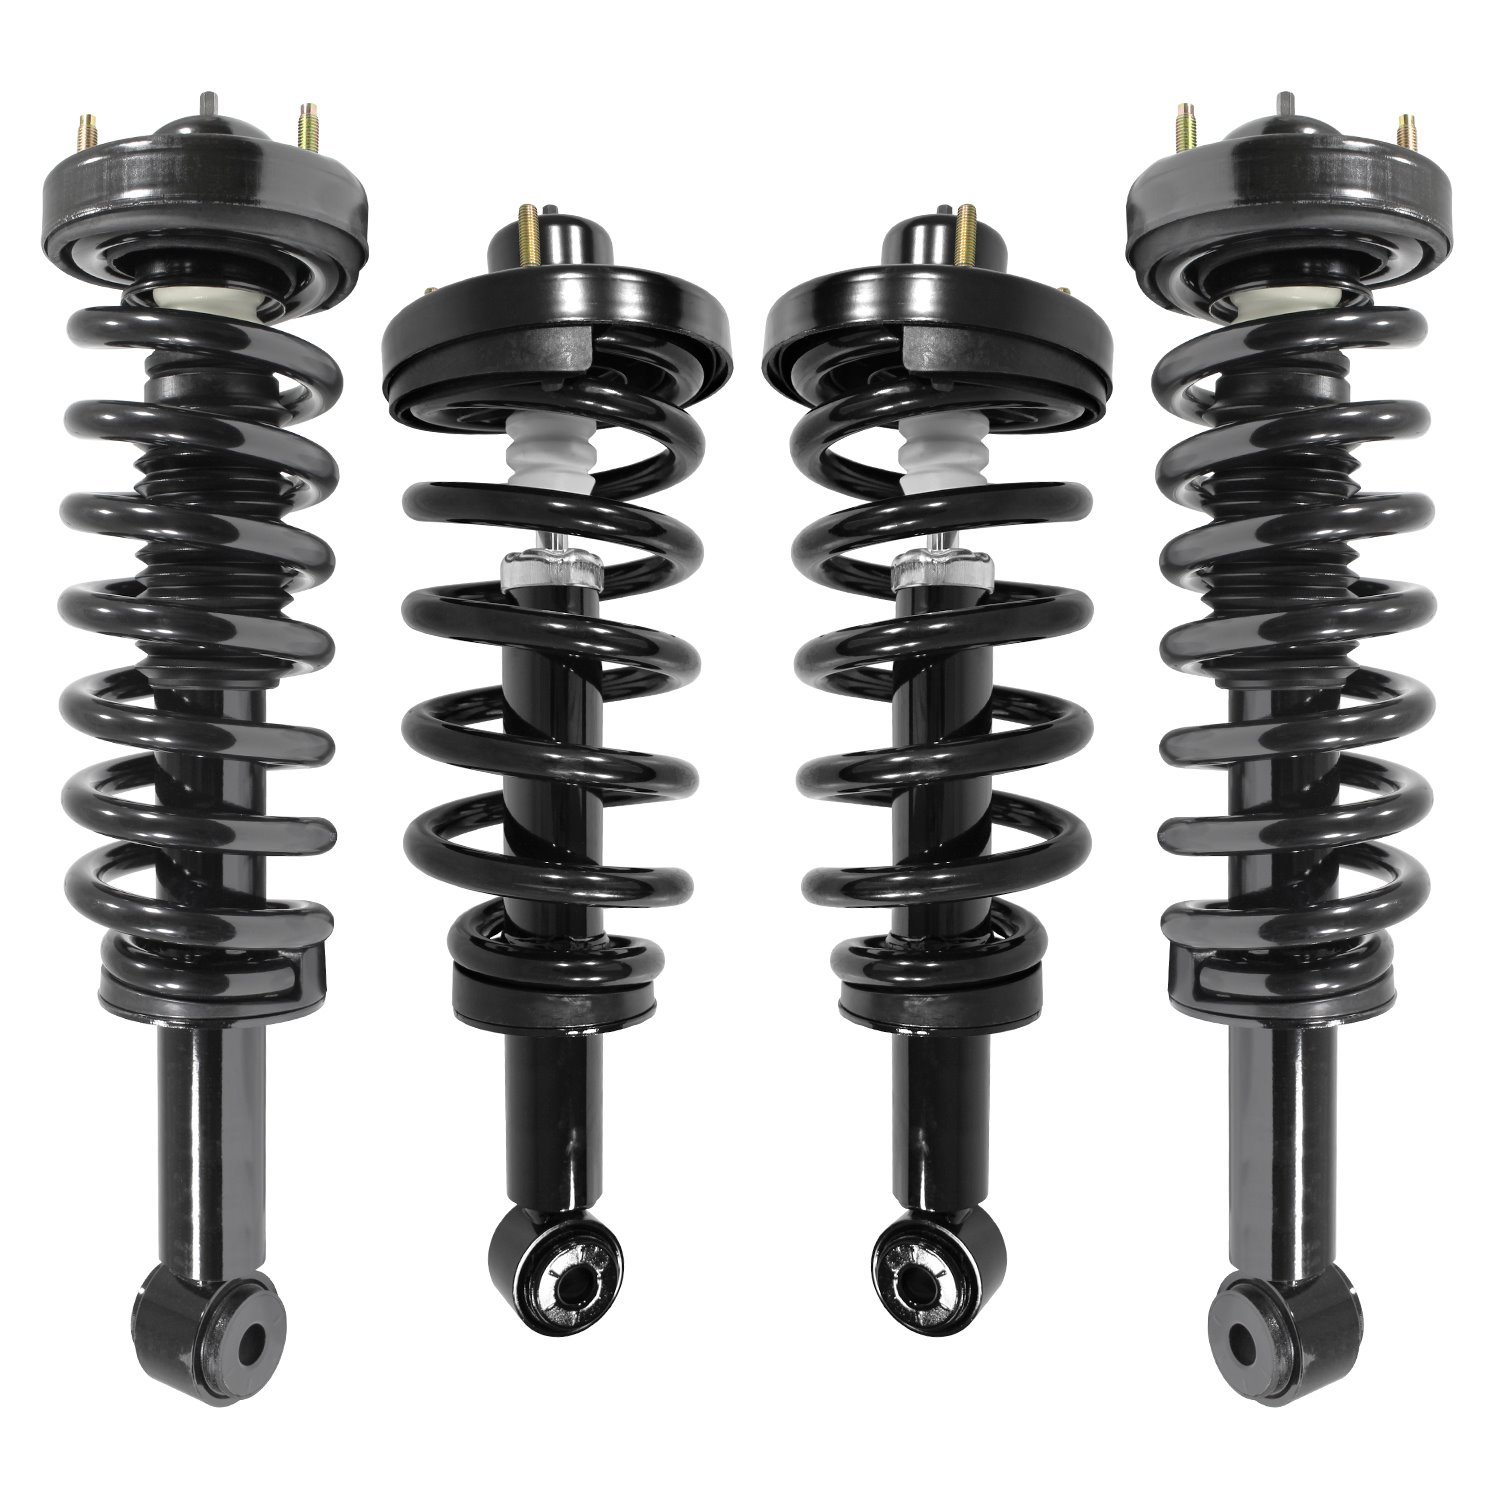 4-61900C-65410C-001 Air Spring To Coil Spring Conversion Kit Fits Select Ford Expedition, Lincoln Navigator